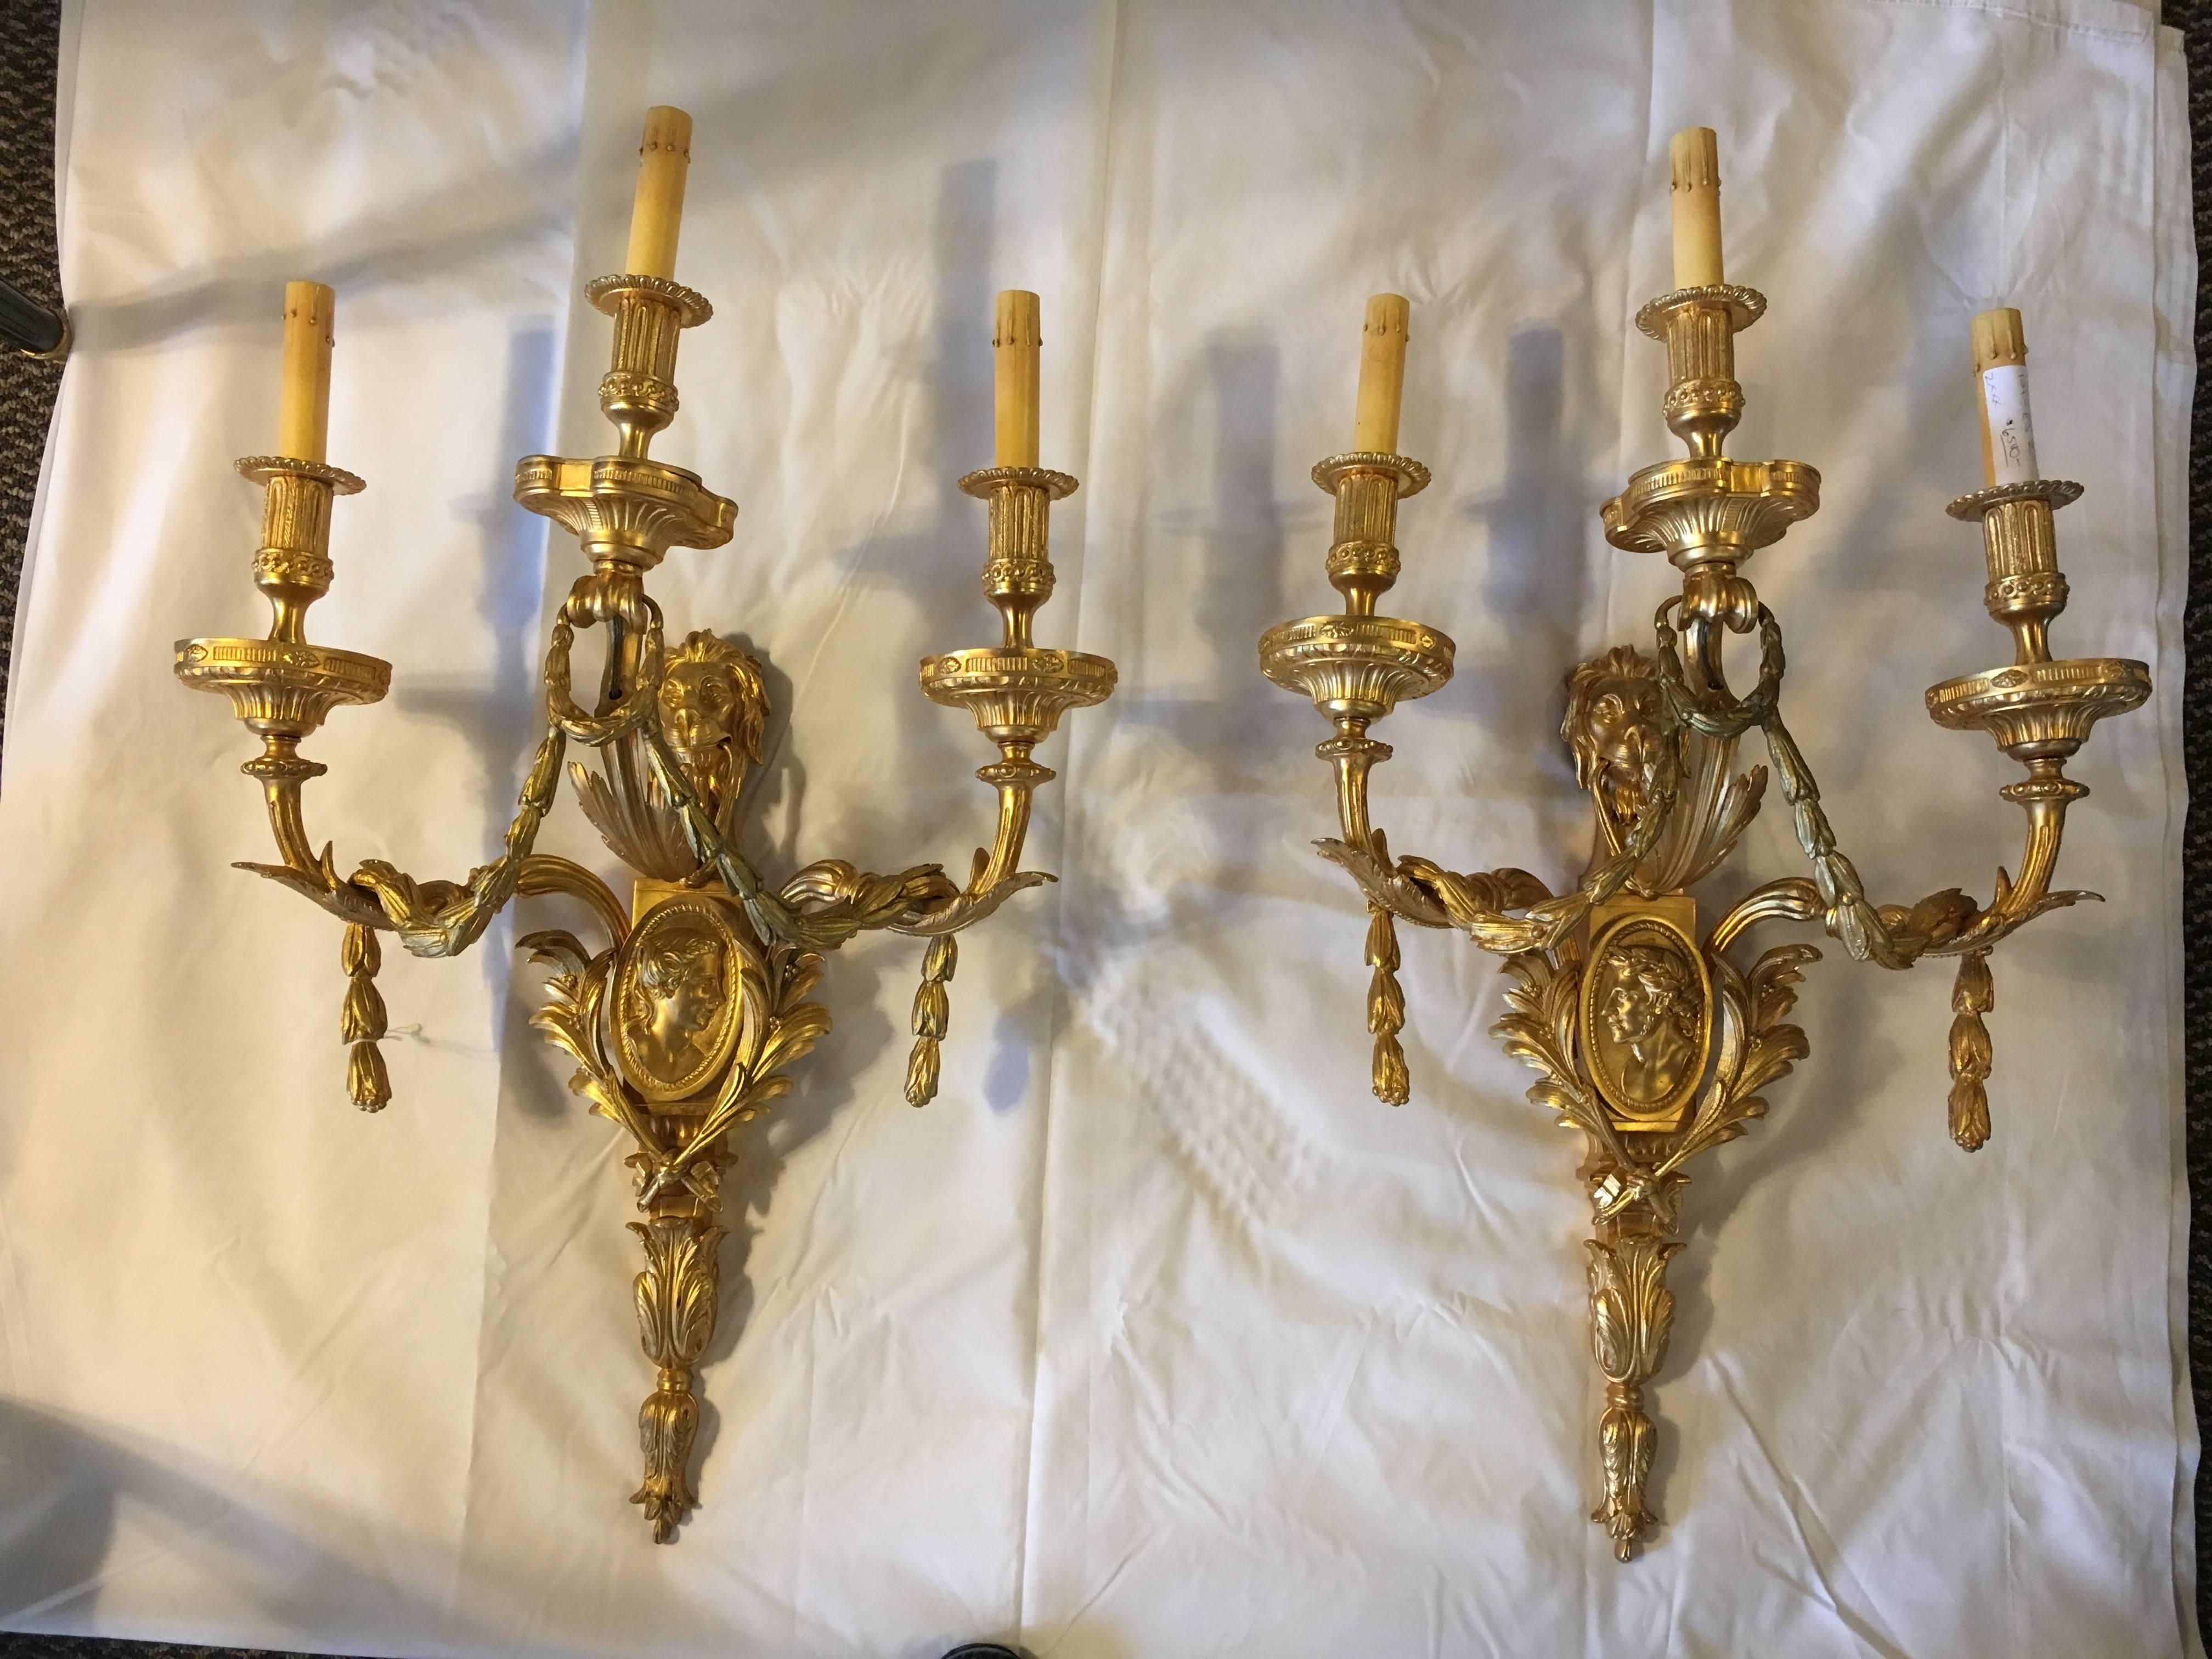 Pair of neoclassical style gilt bronze sconces. In the Louis XVI fashion these fine pair of detailed wall sconce each have three lights. Both with recent wiring. The pair with opposing male and female busts and adorning lion masks. Solid bronze.